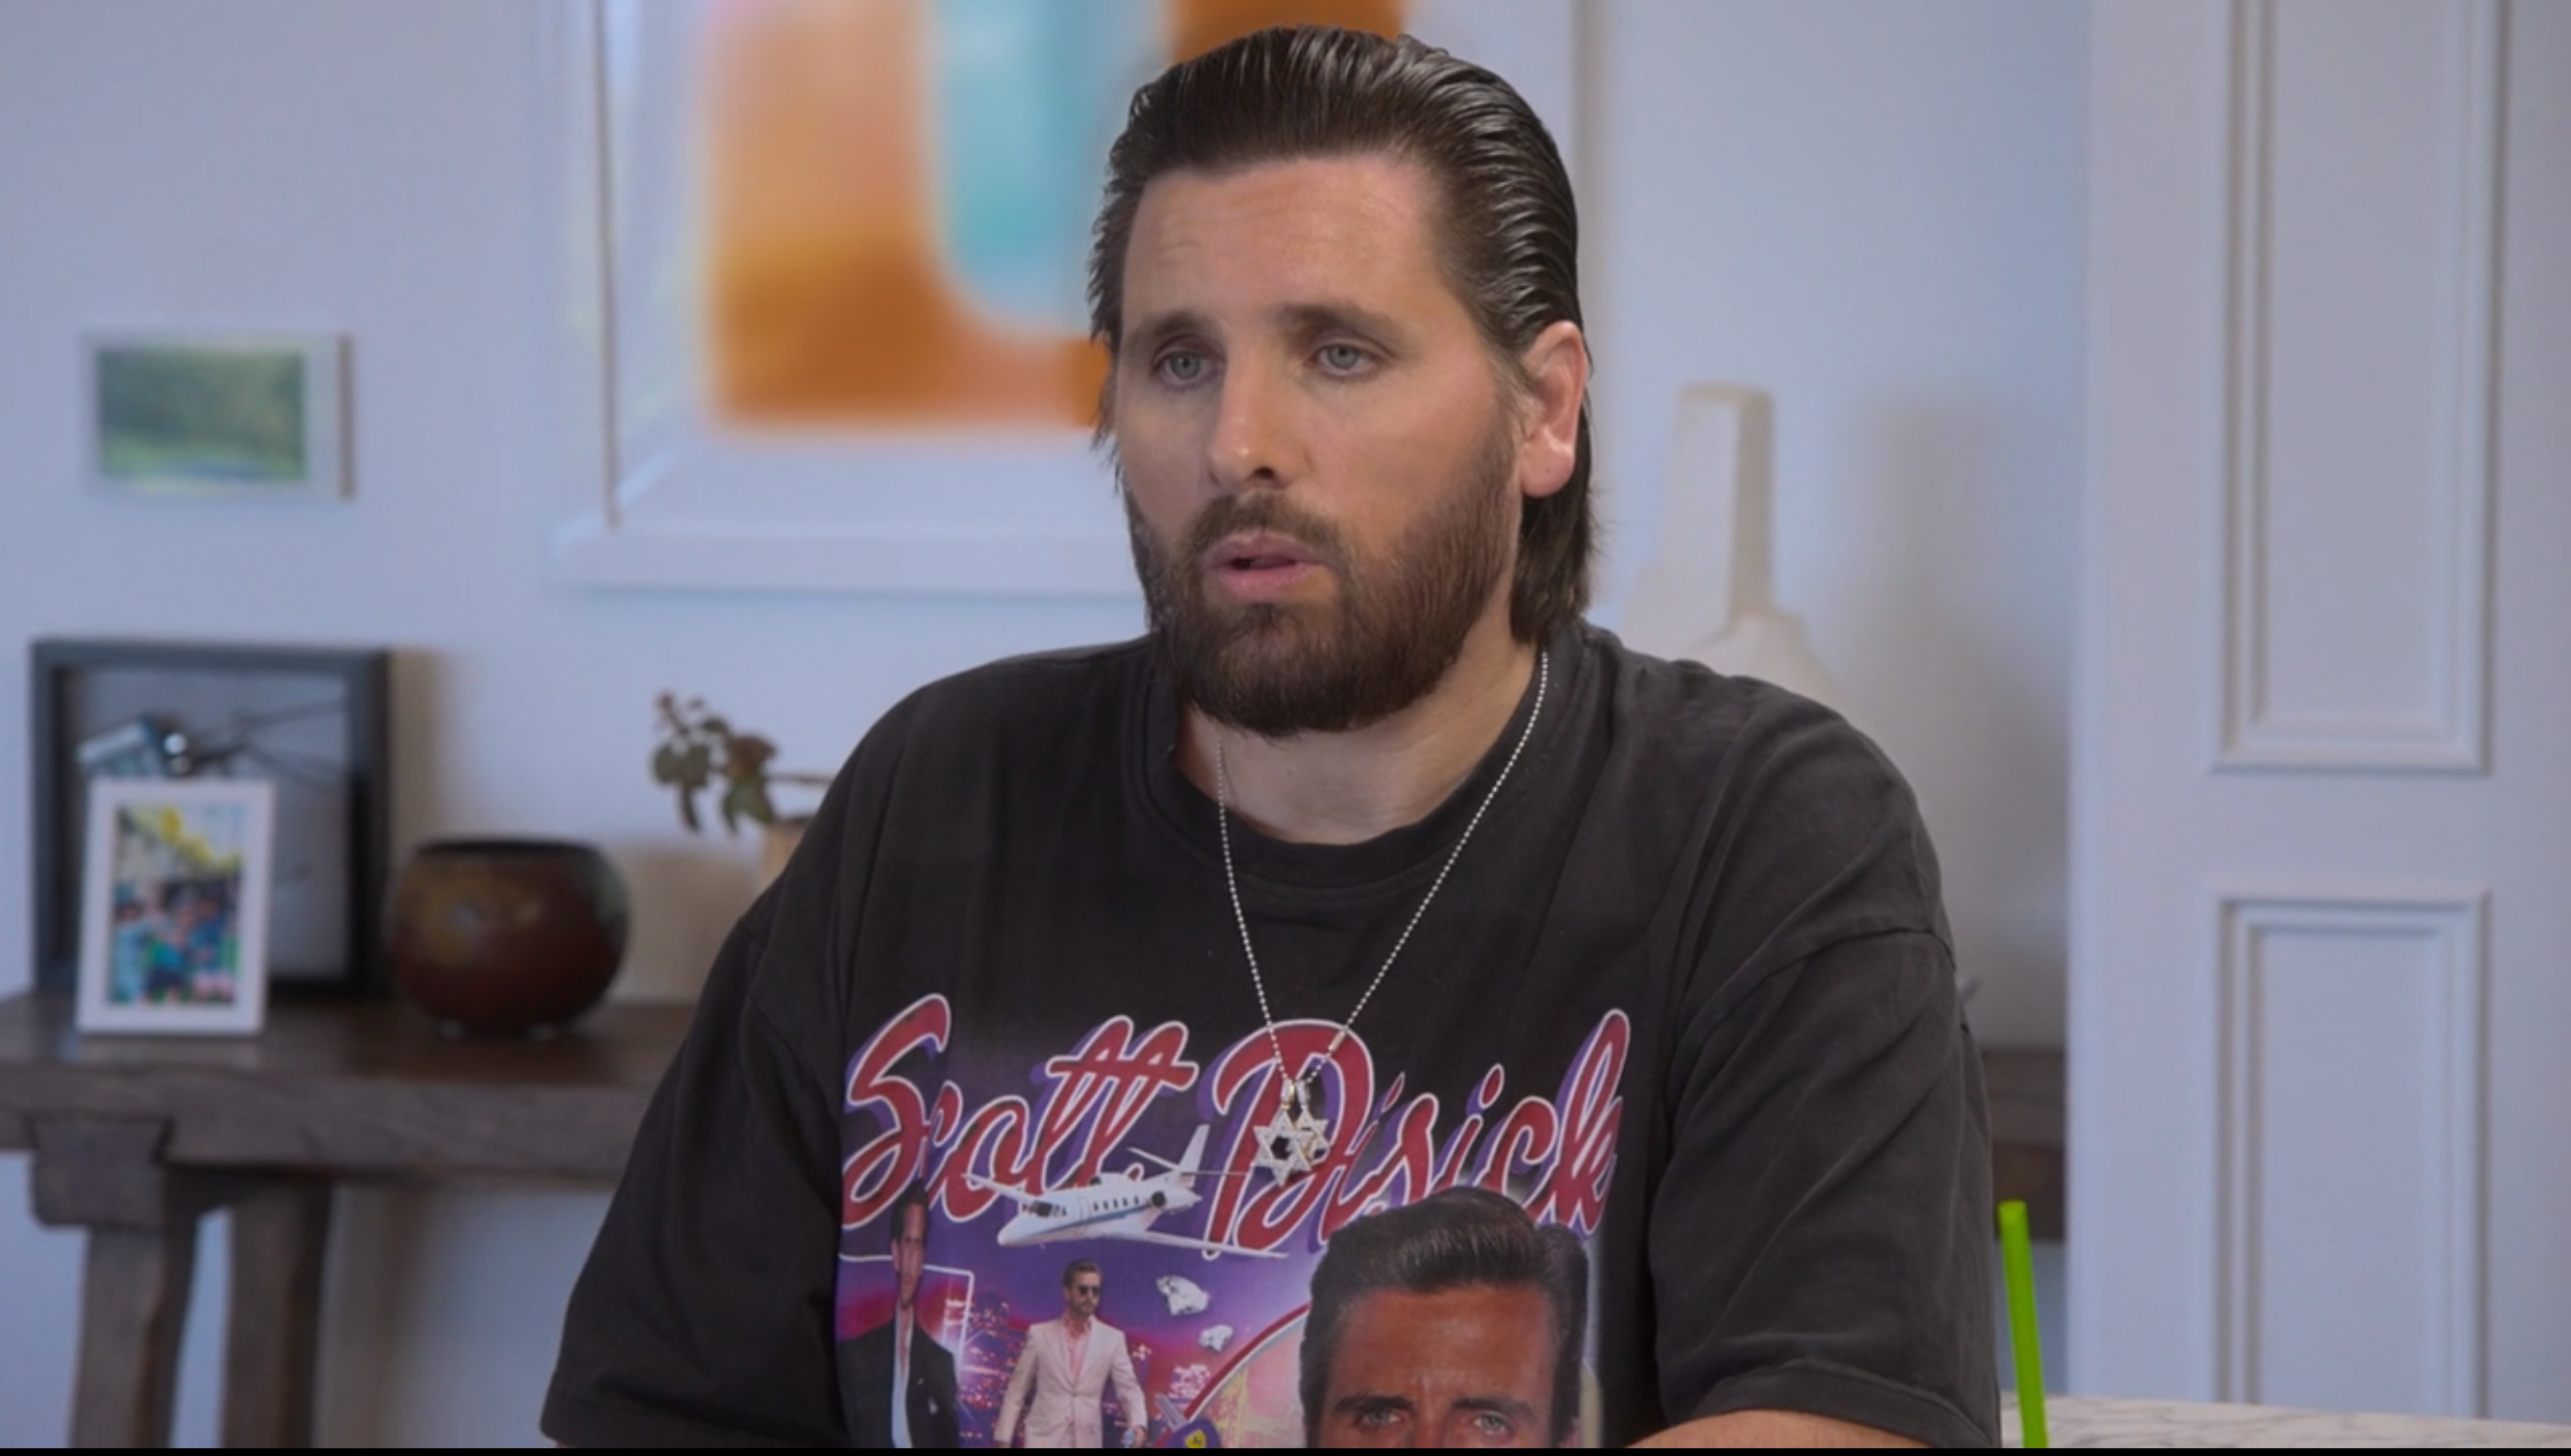 Scott's weight loss comes after he appeared unhealthy on The Kardashians following his 2021 car crash